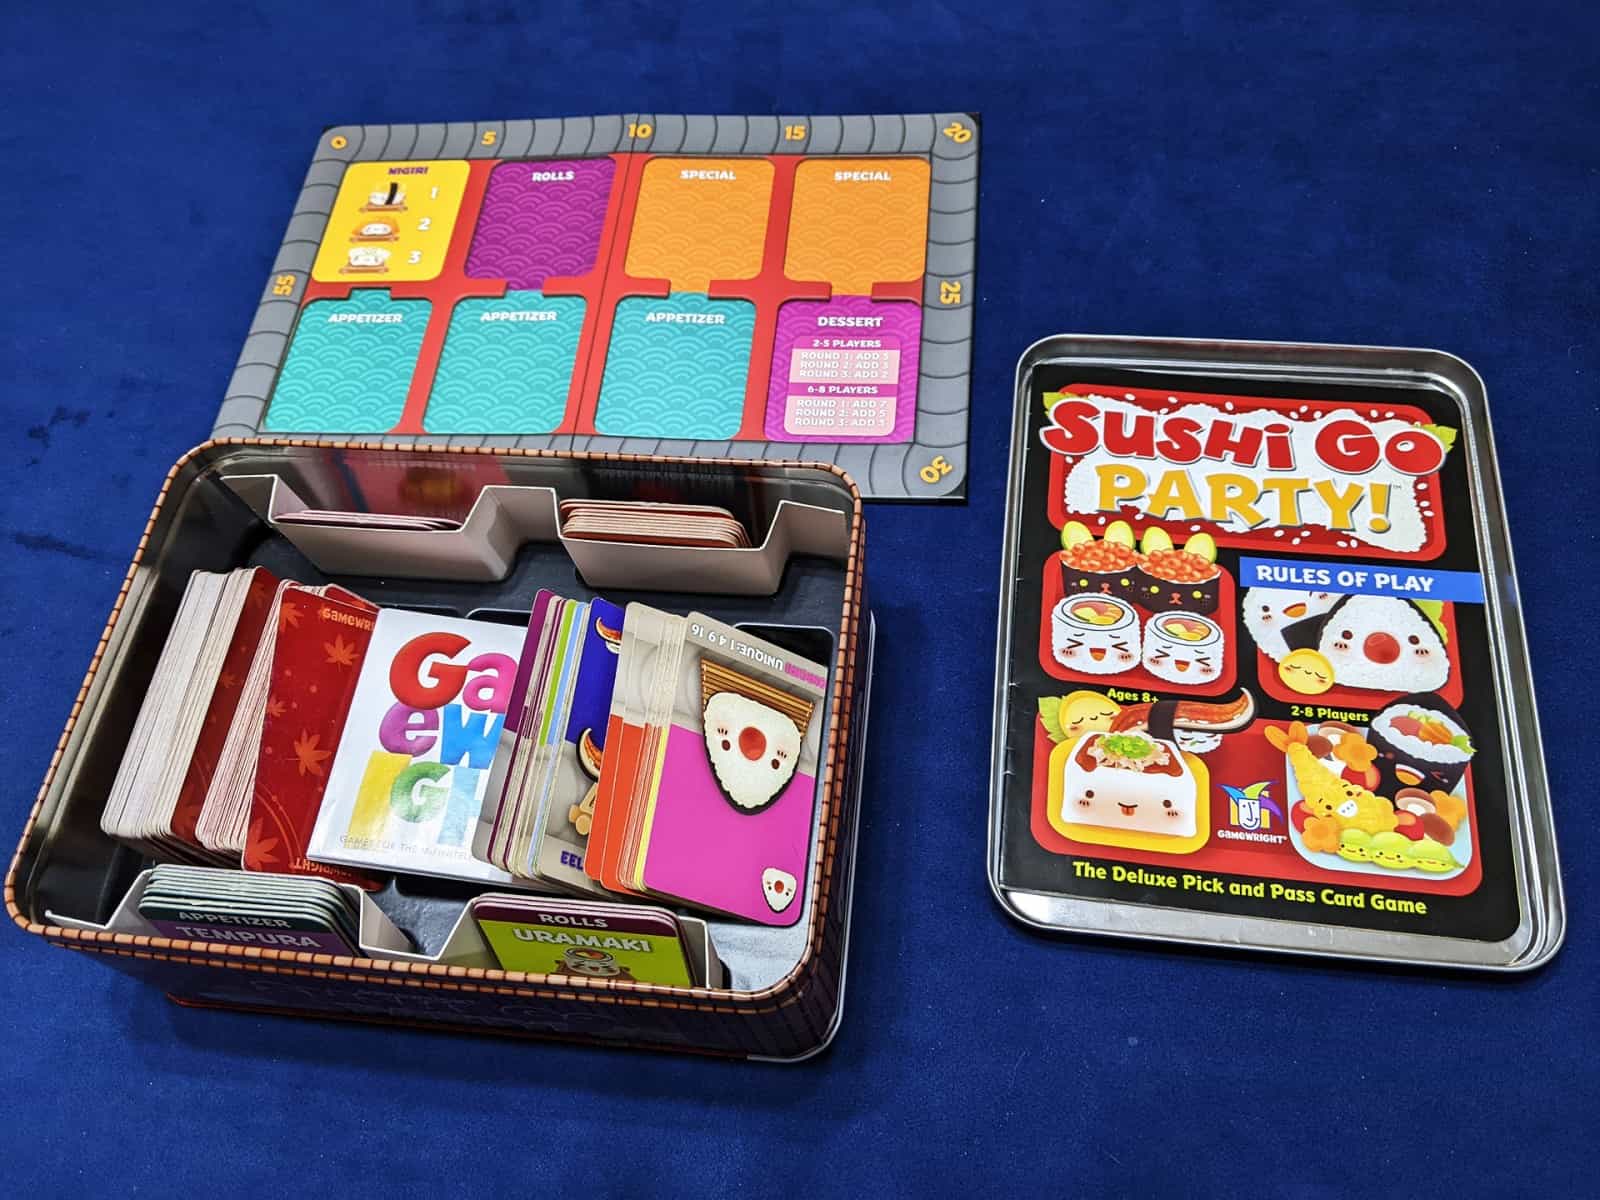 Sushi Go Party! board game